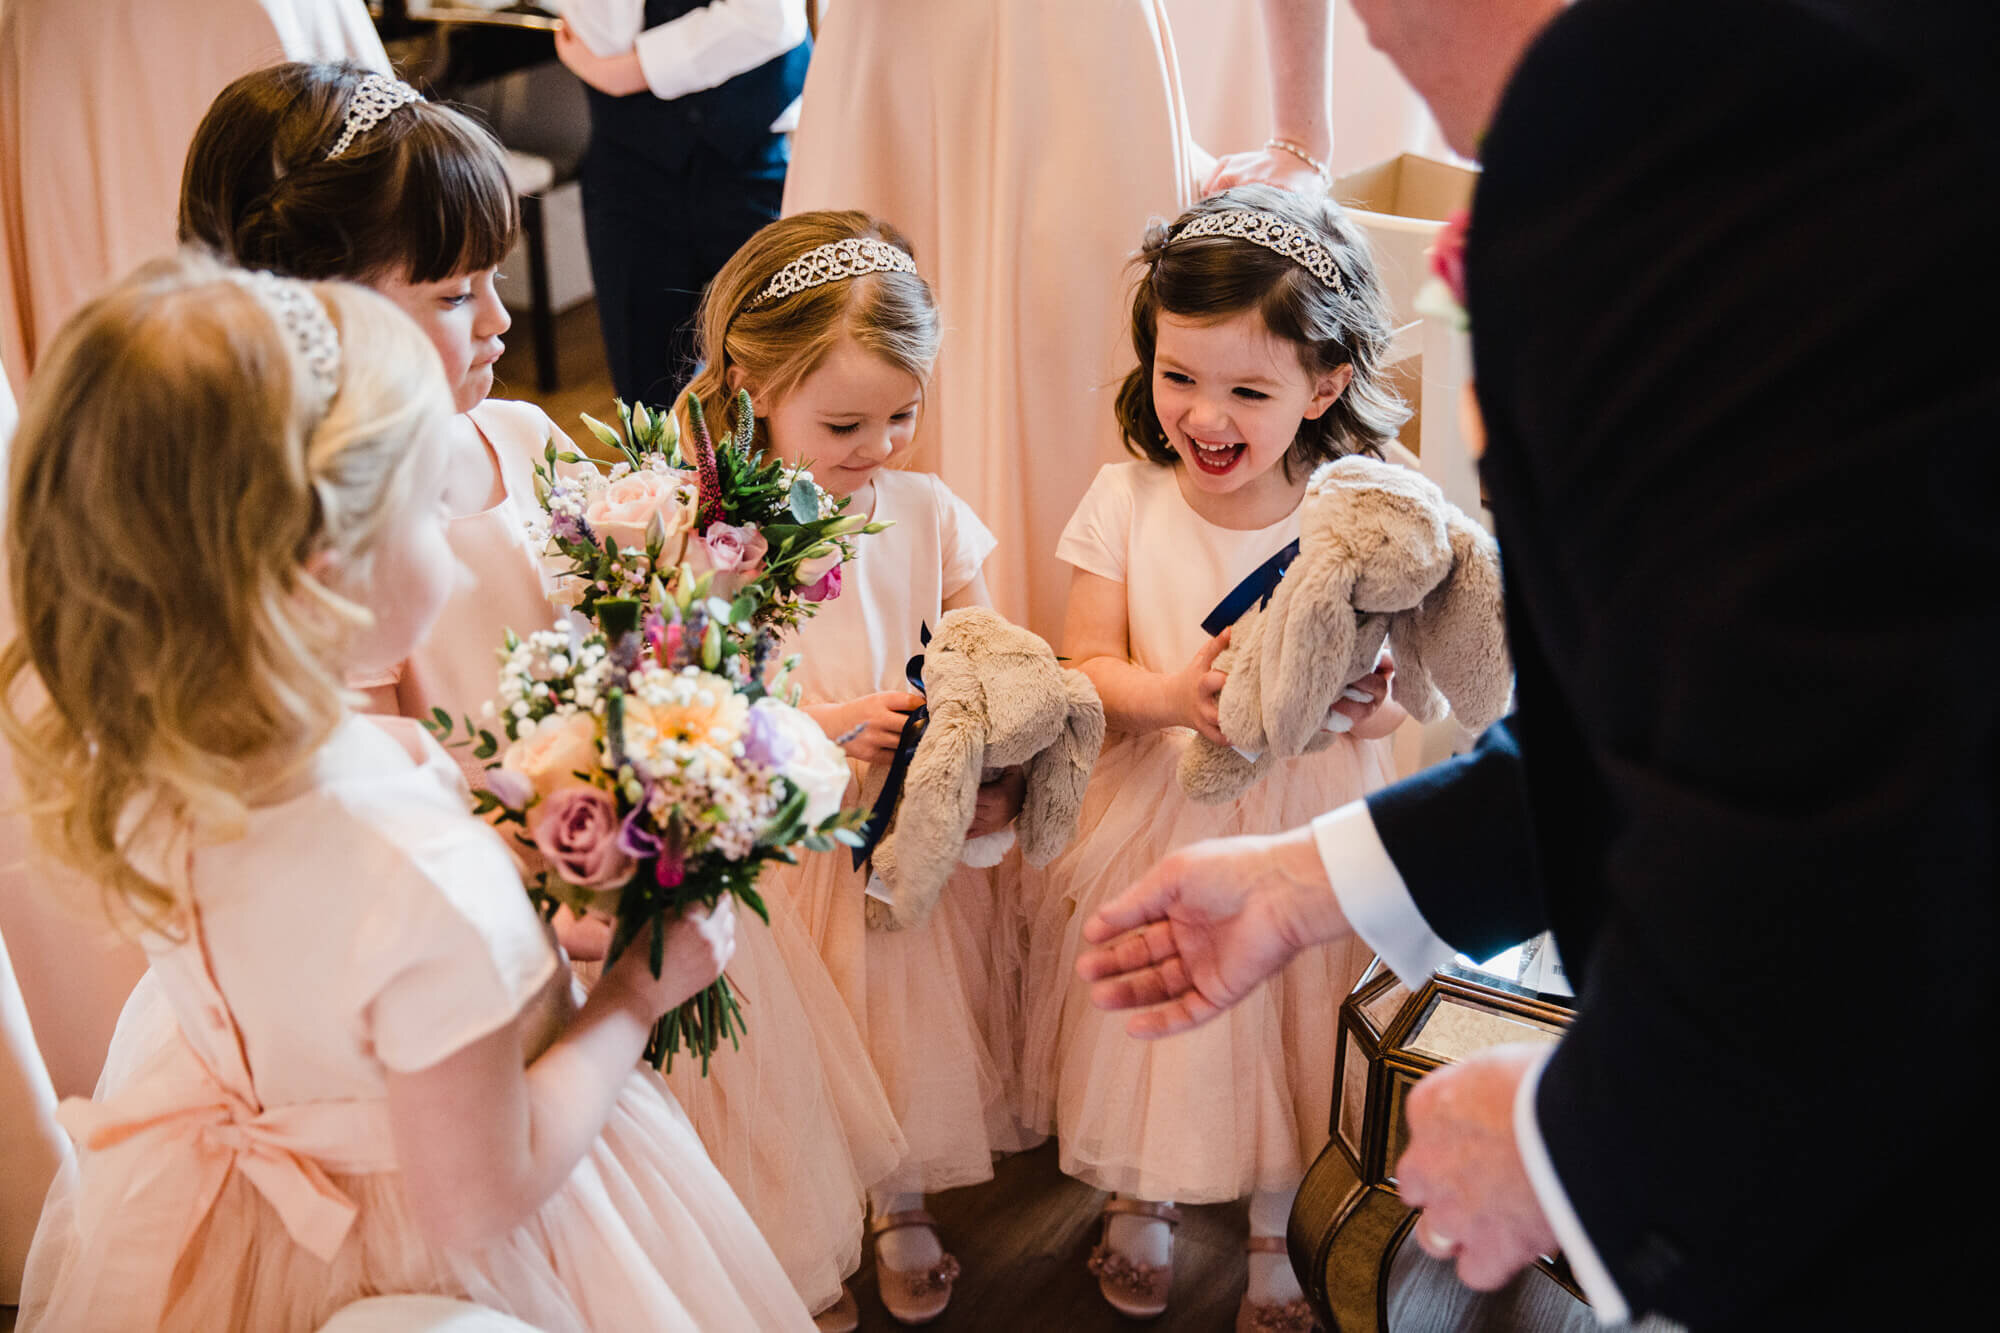 flower girls holding rabbit toys and laughing in bridal suite